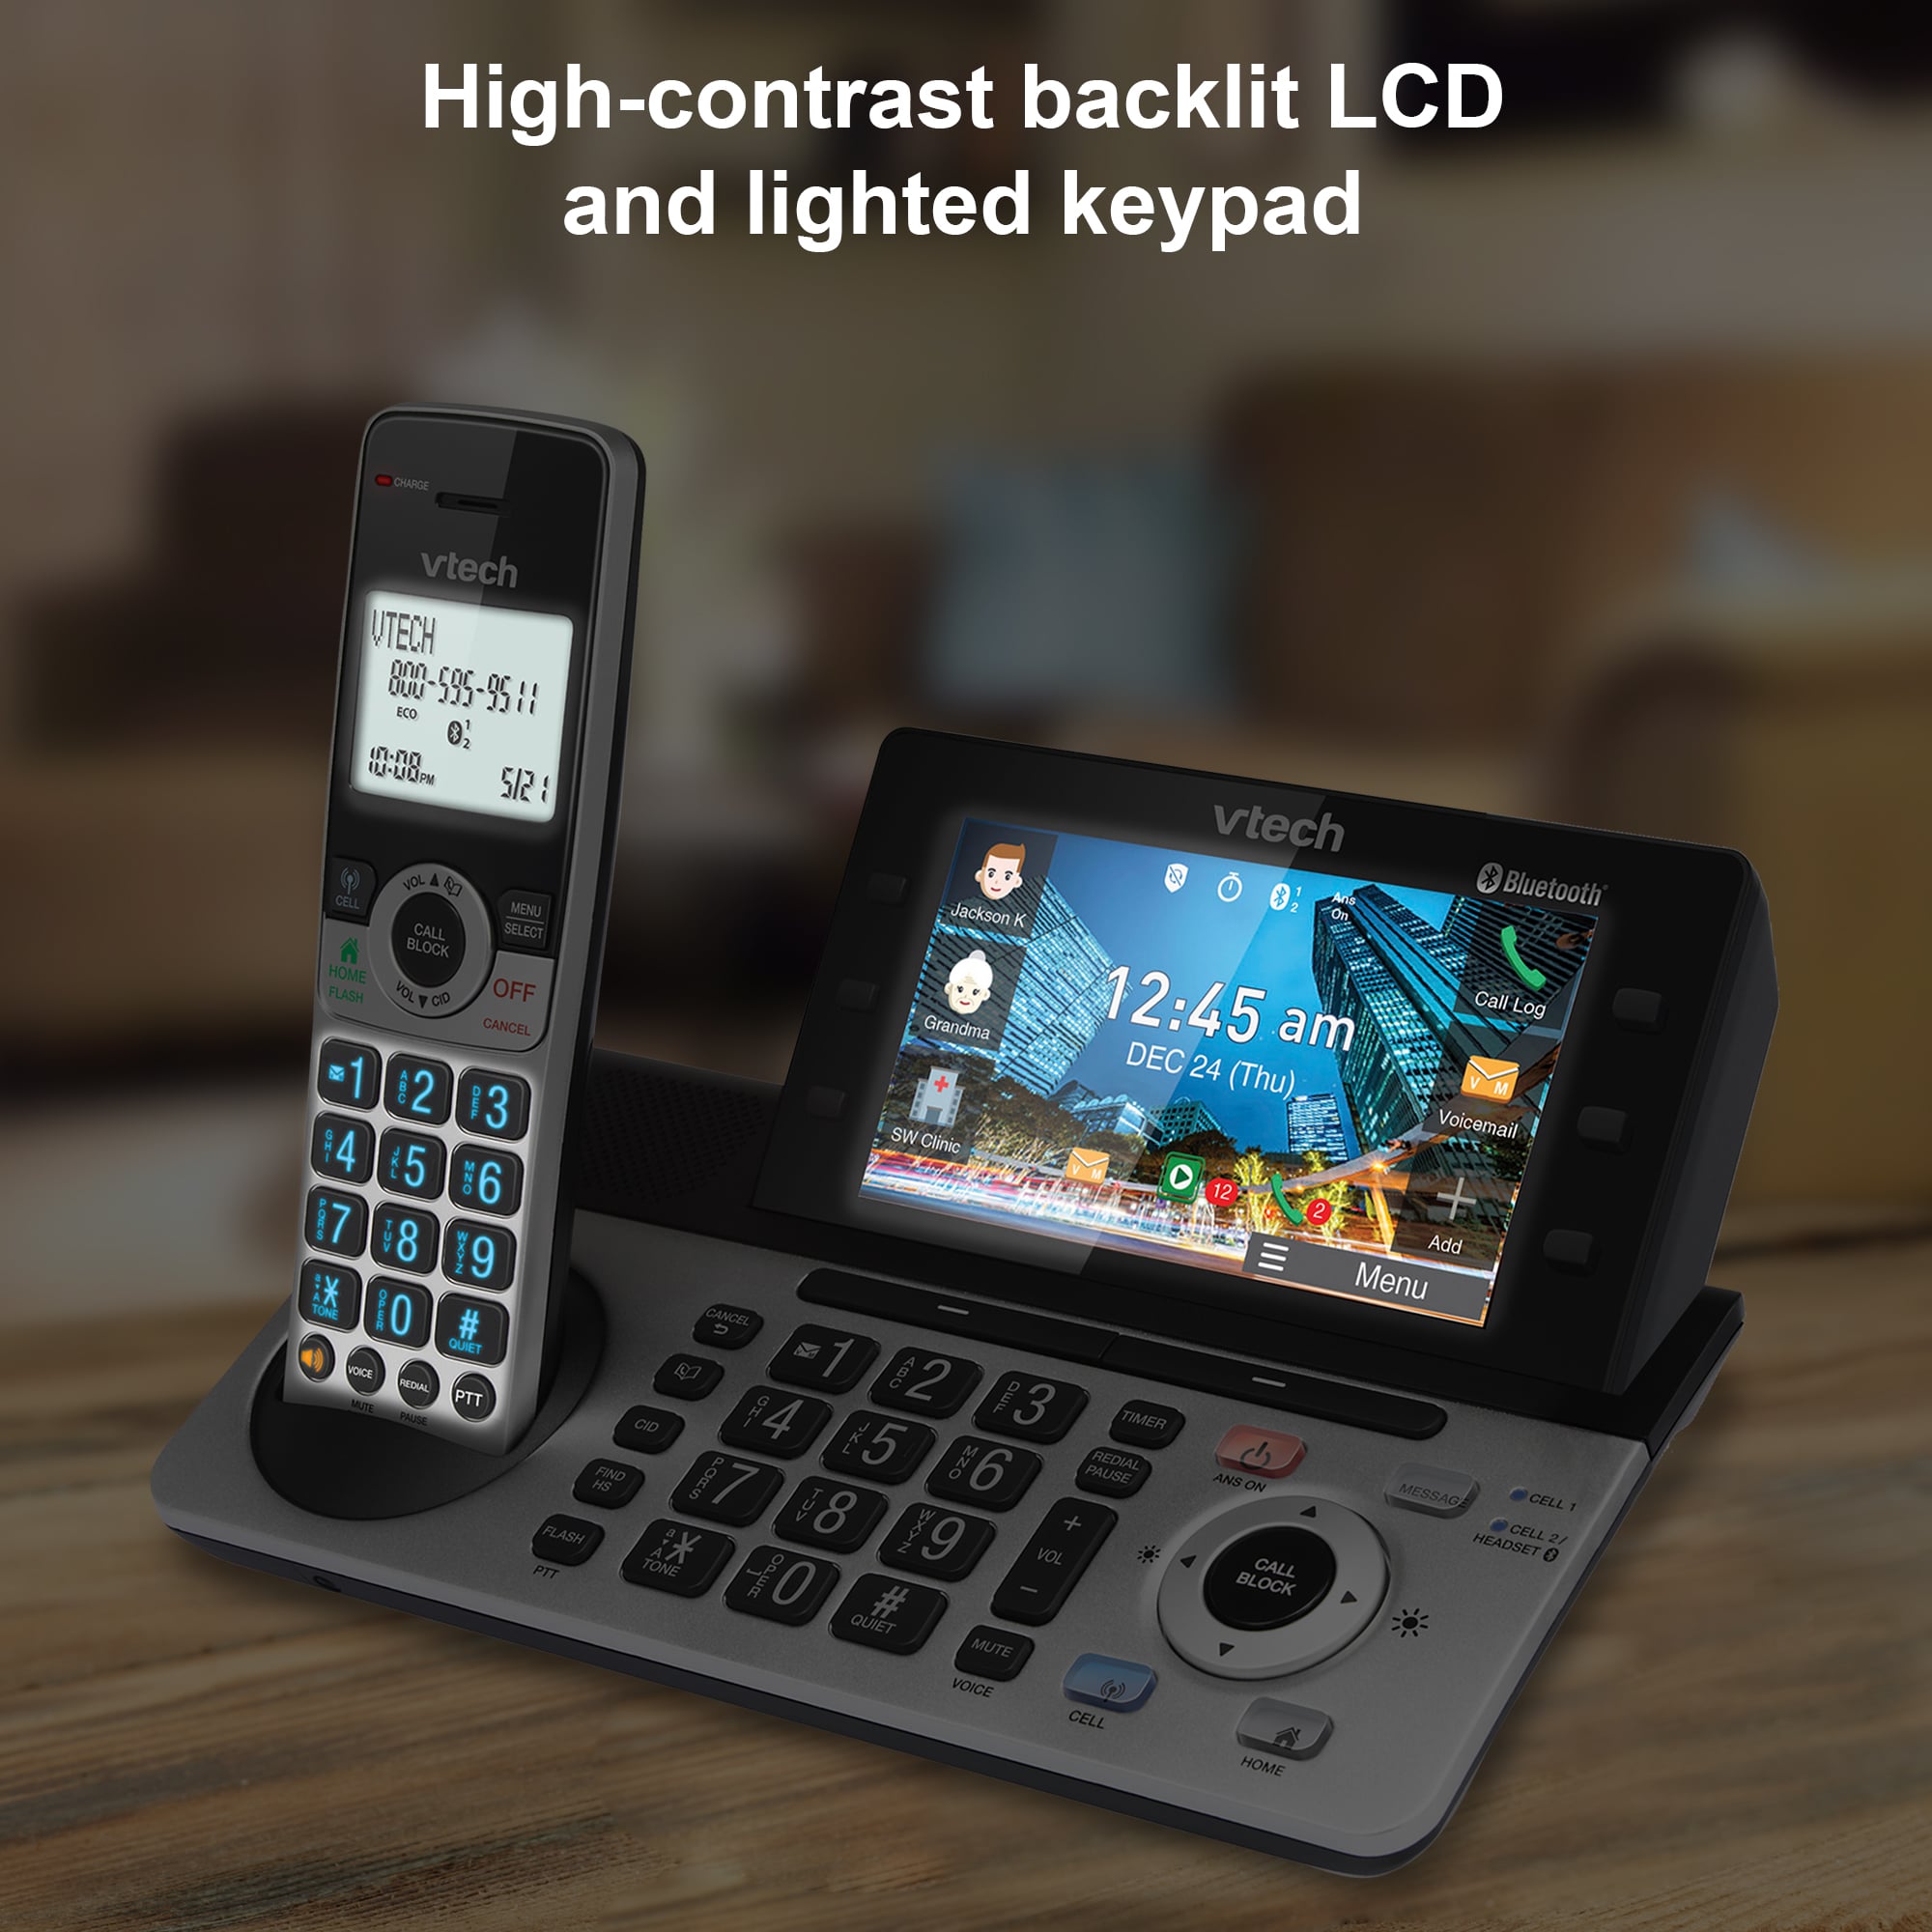 3-Handset Expandable Cordless Phone with Bluetooth Connect to Cell, Smart Call Blocker,  Answering System, and 5